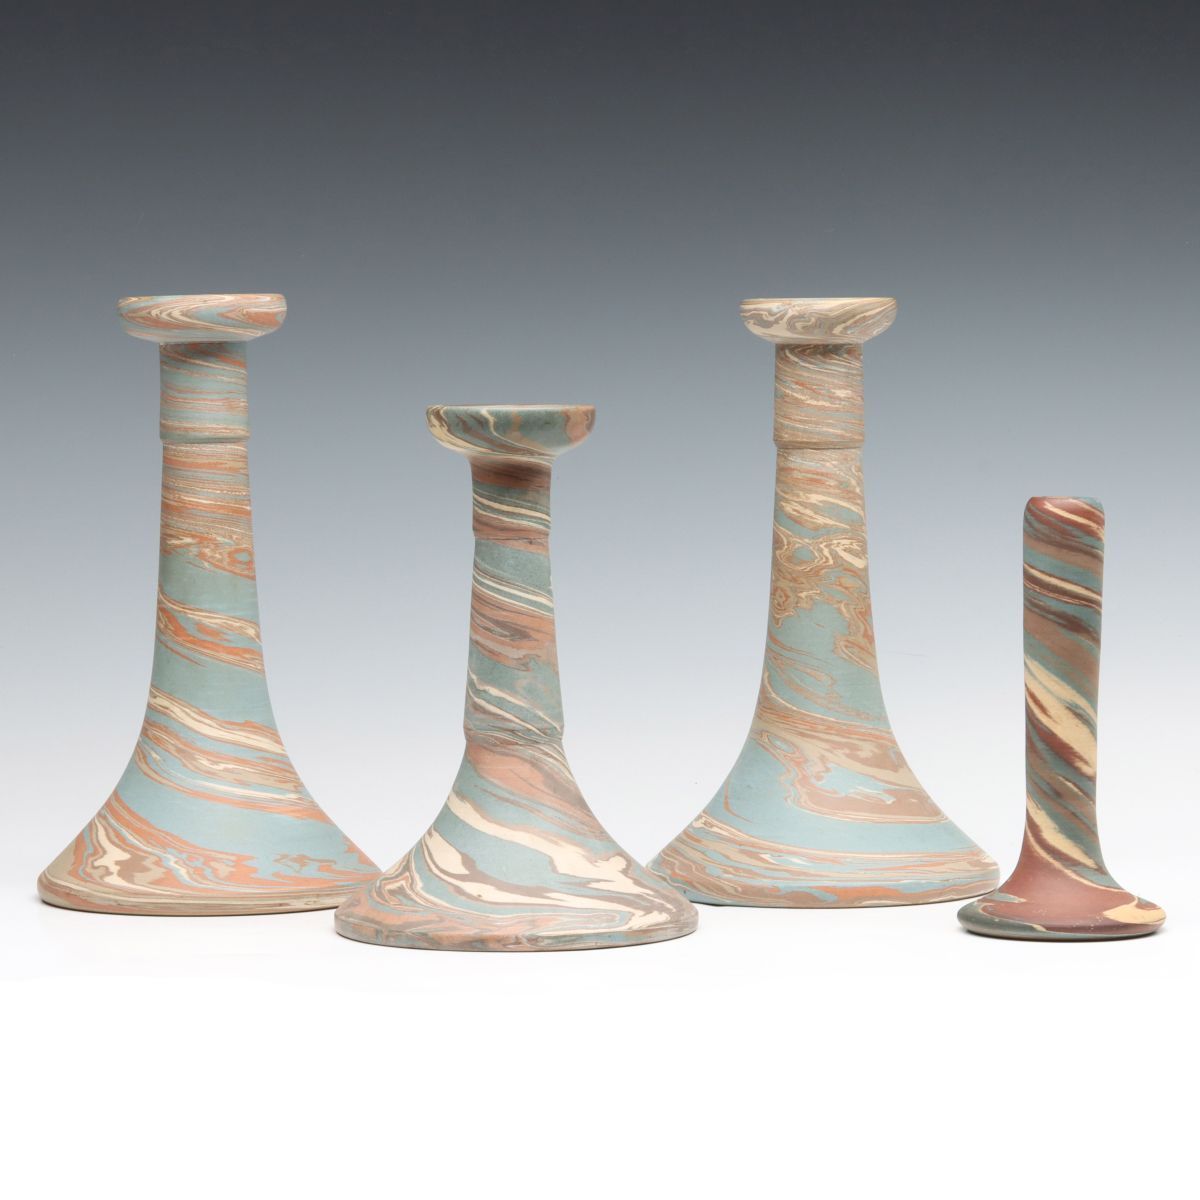 A COLLECTION OF NILOAK MISSIONWARE CANDLESTICKS